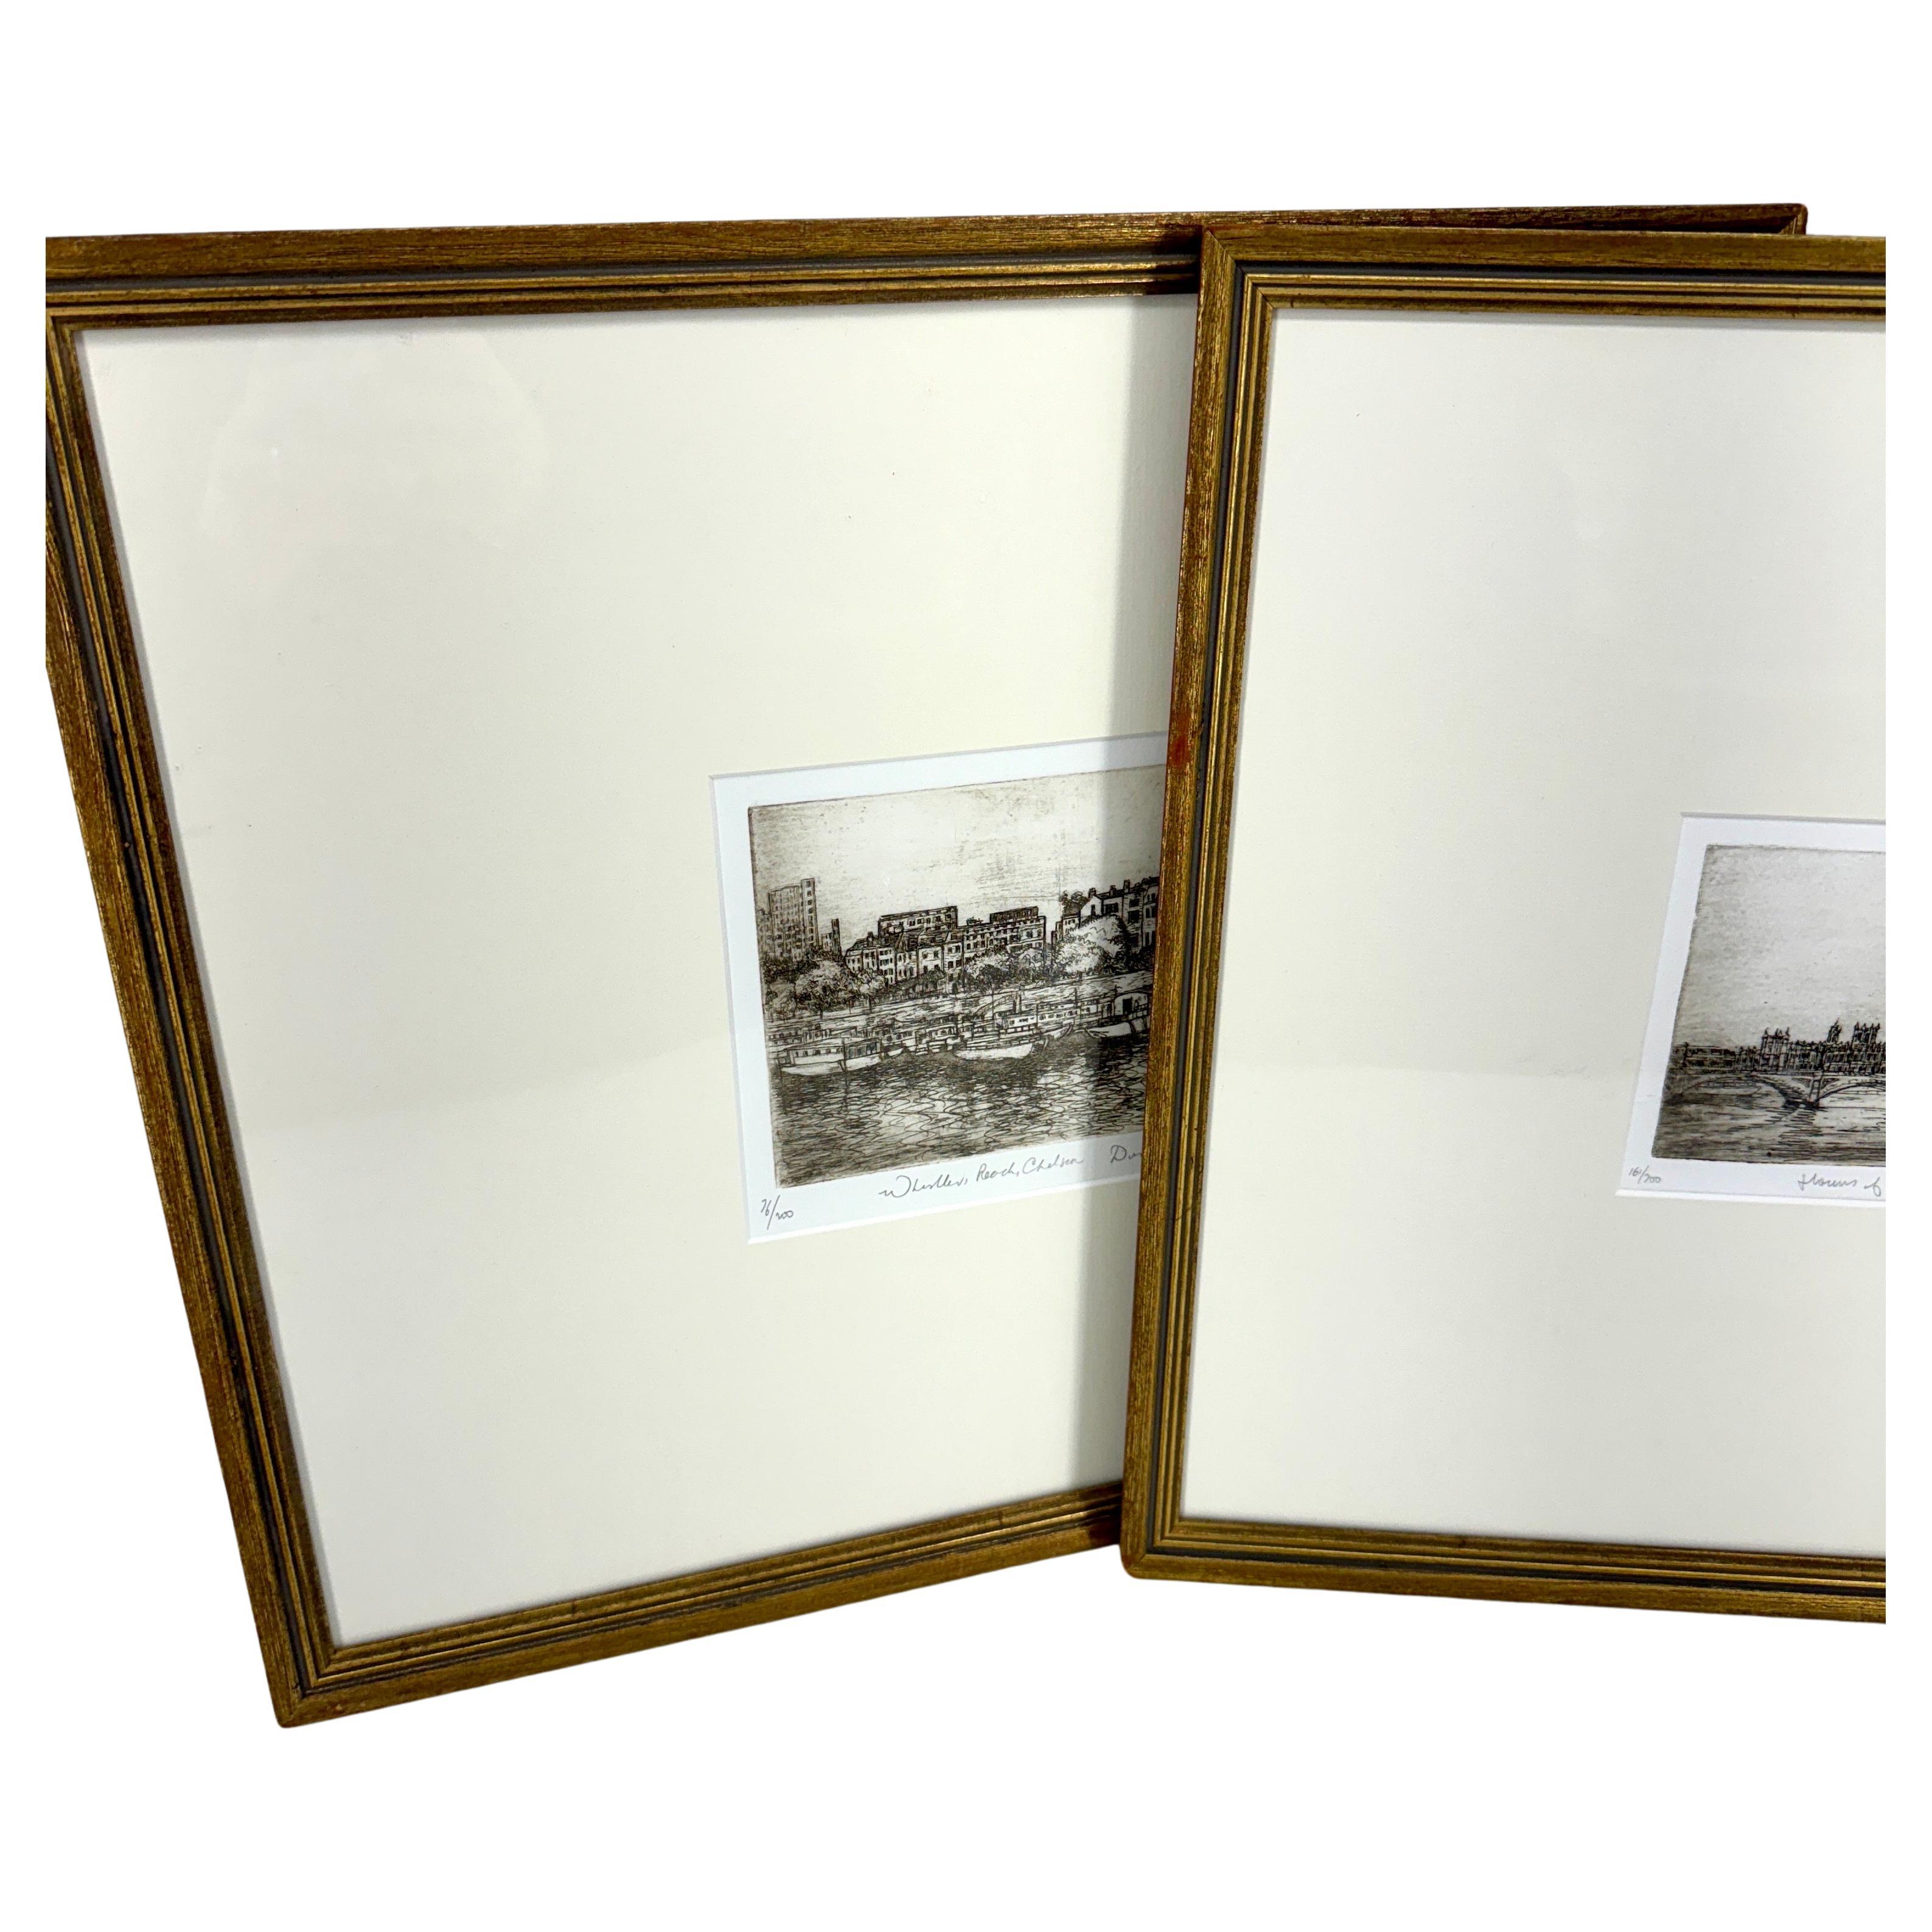 Set of 3 Signed Dorothy Griffiths Etchings of London Scenes, Framed

Signed and numbered etchings from Dorothy Griffiths, a well-known London artist. Her drawings encompass frequented spots in London, UK.  This curated set would be fantastic on a